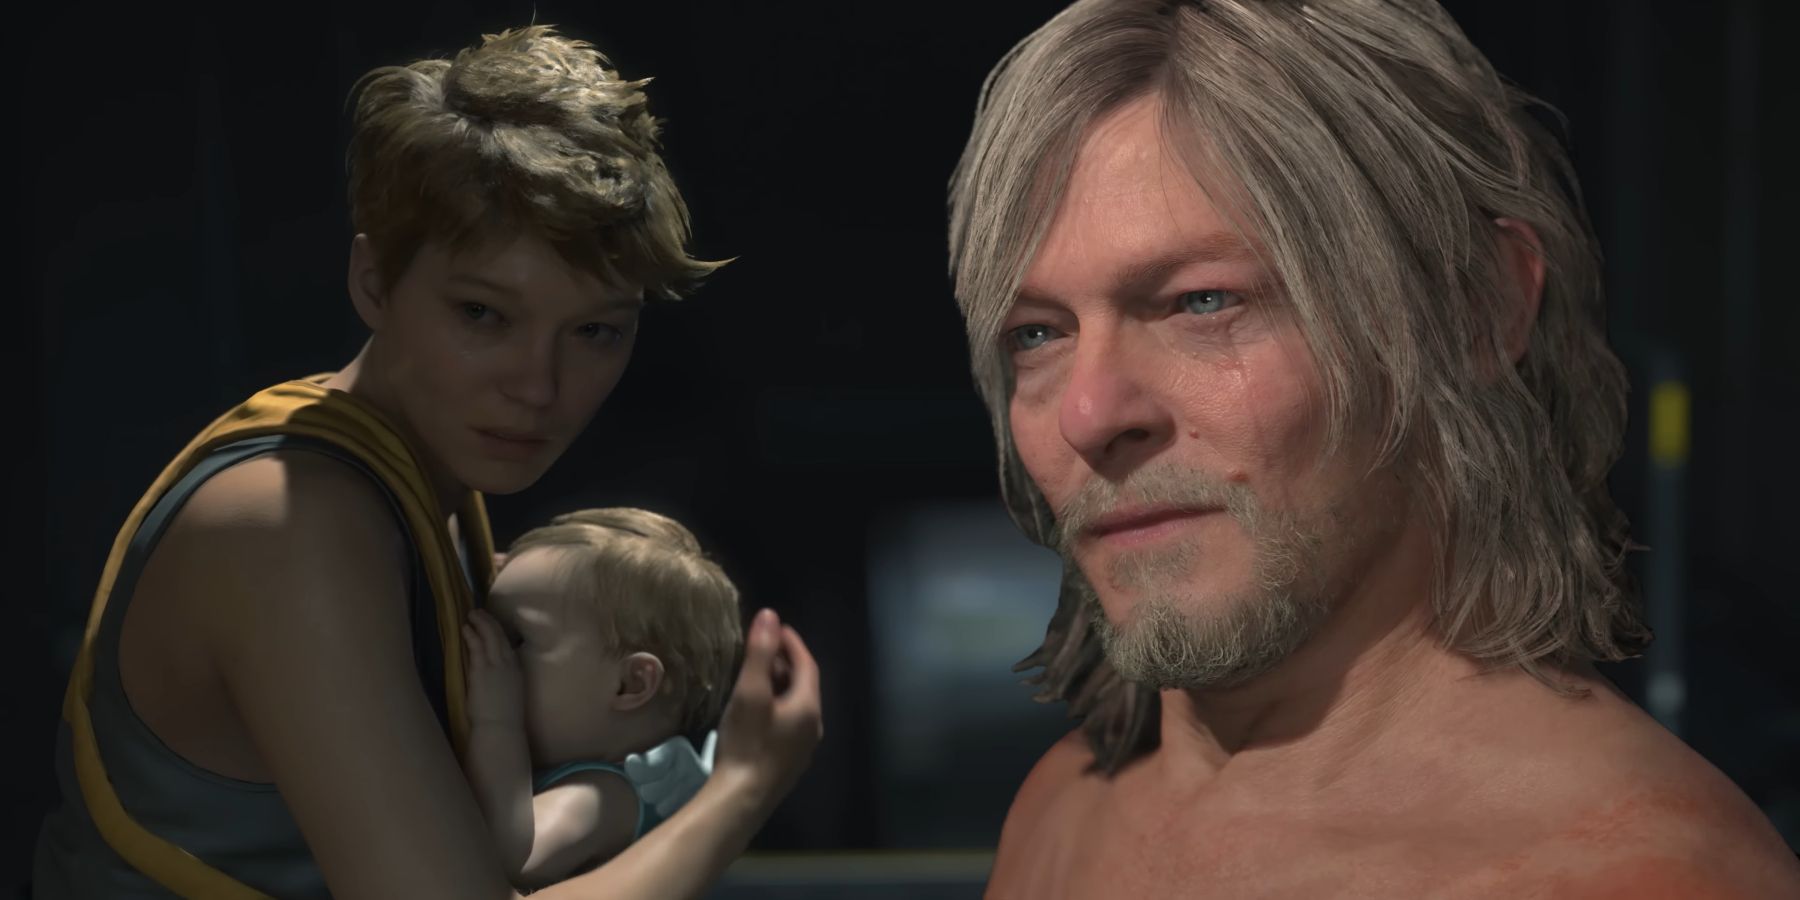 5 Questions Death Stranding 2 Has to Answer In Its Next Trailer